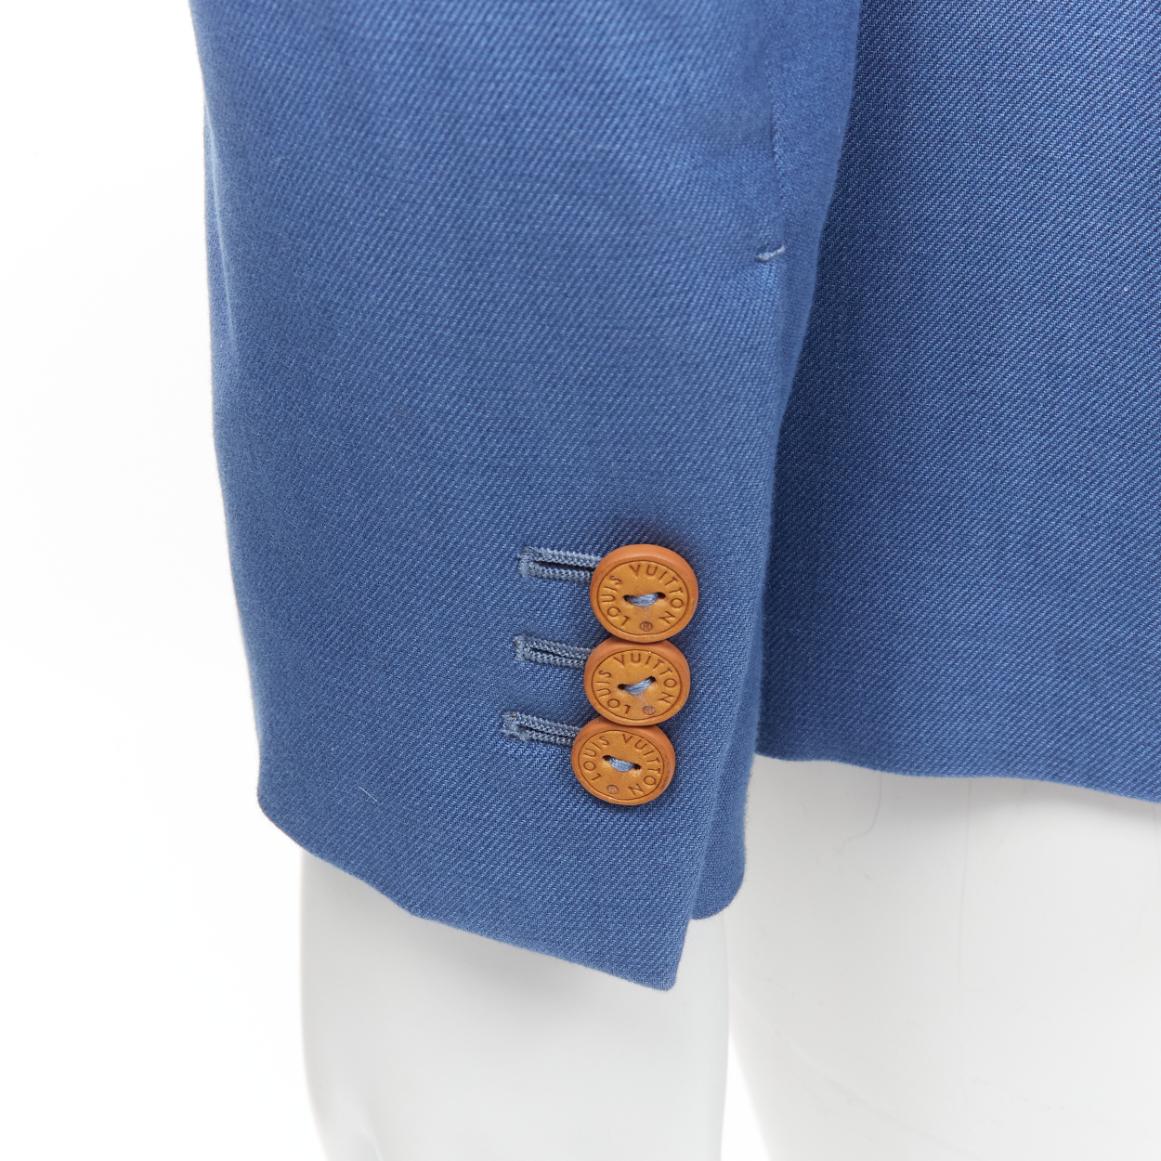 new LOUIS VUITTON brown leather LV buttons blue cotton double breasted blazer FR44 XS
Reference: EDTG/A00082
Brand: Louis Vuitton
Material: Cotton
Color: Blue
Pattern: Solid
Closure: Button
Lining: Black Fabric
Extra Details: Leather LV buttons.